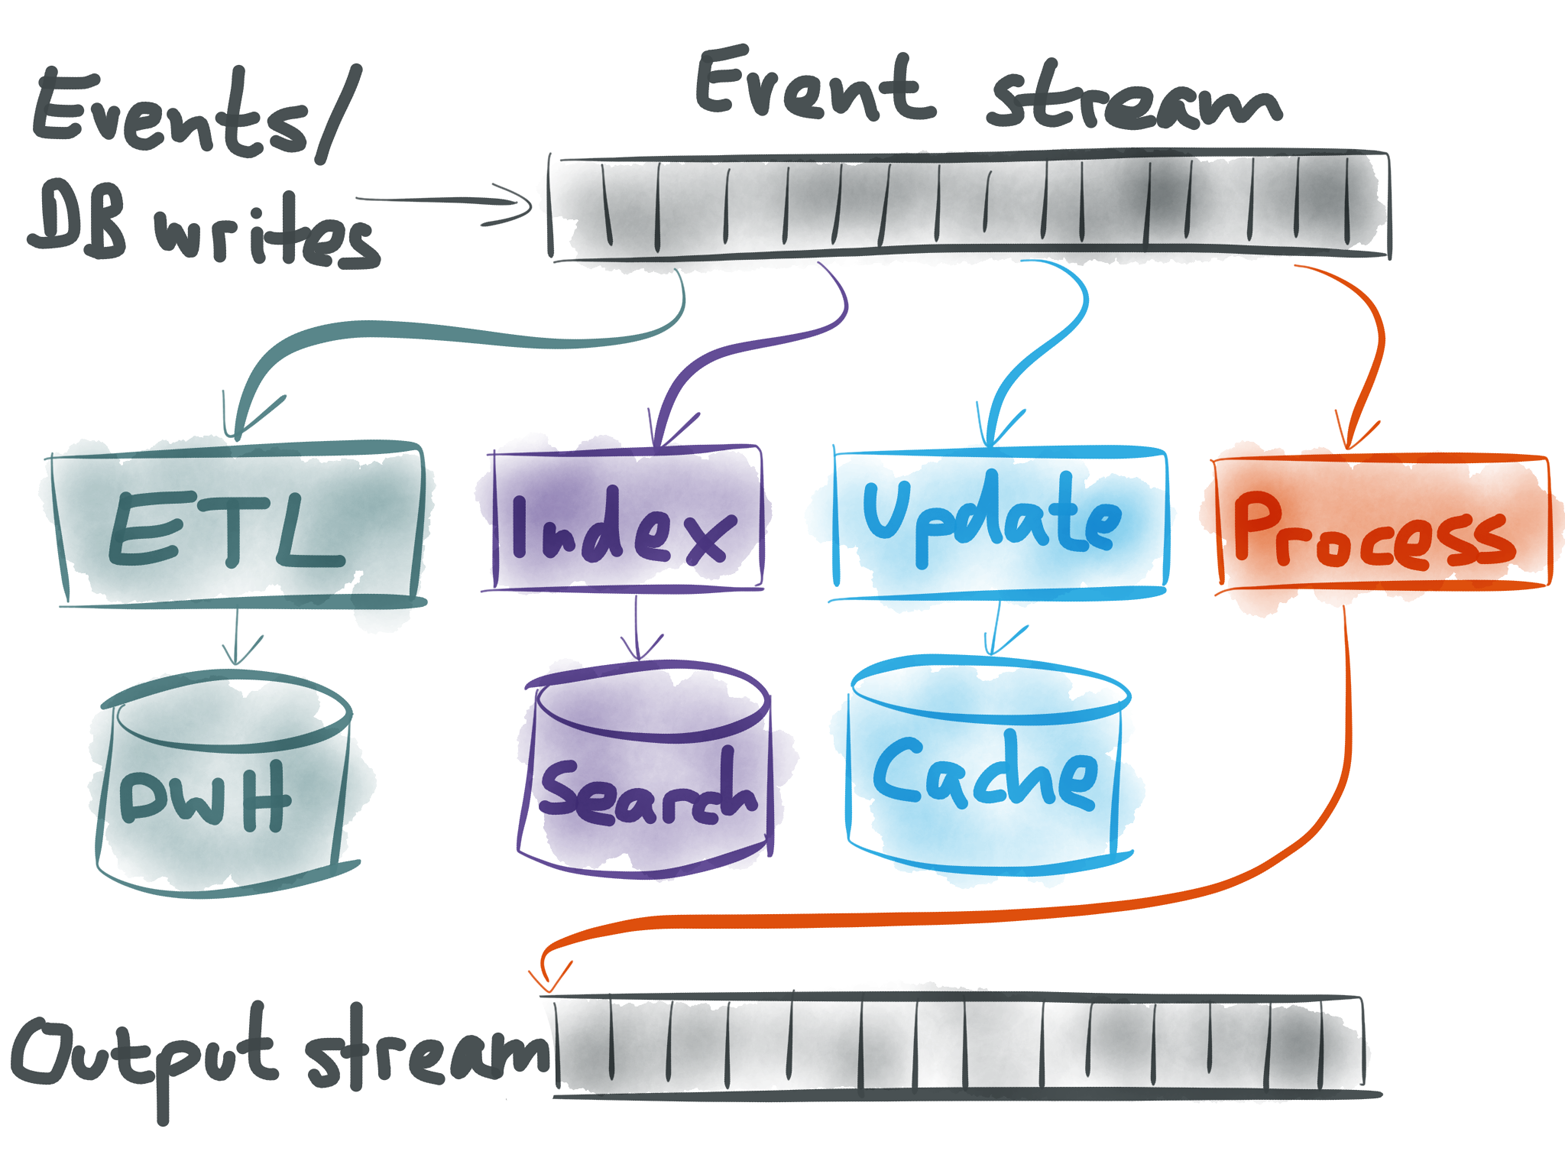 Several possibilities for using an event stream.